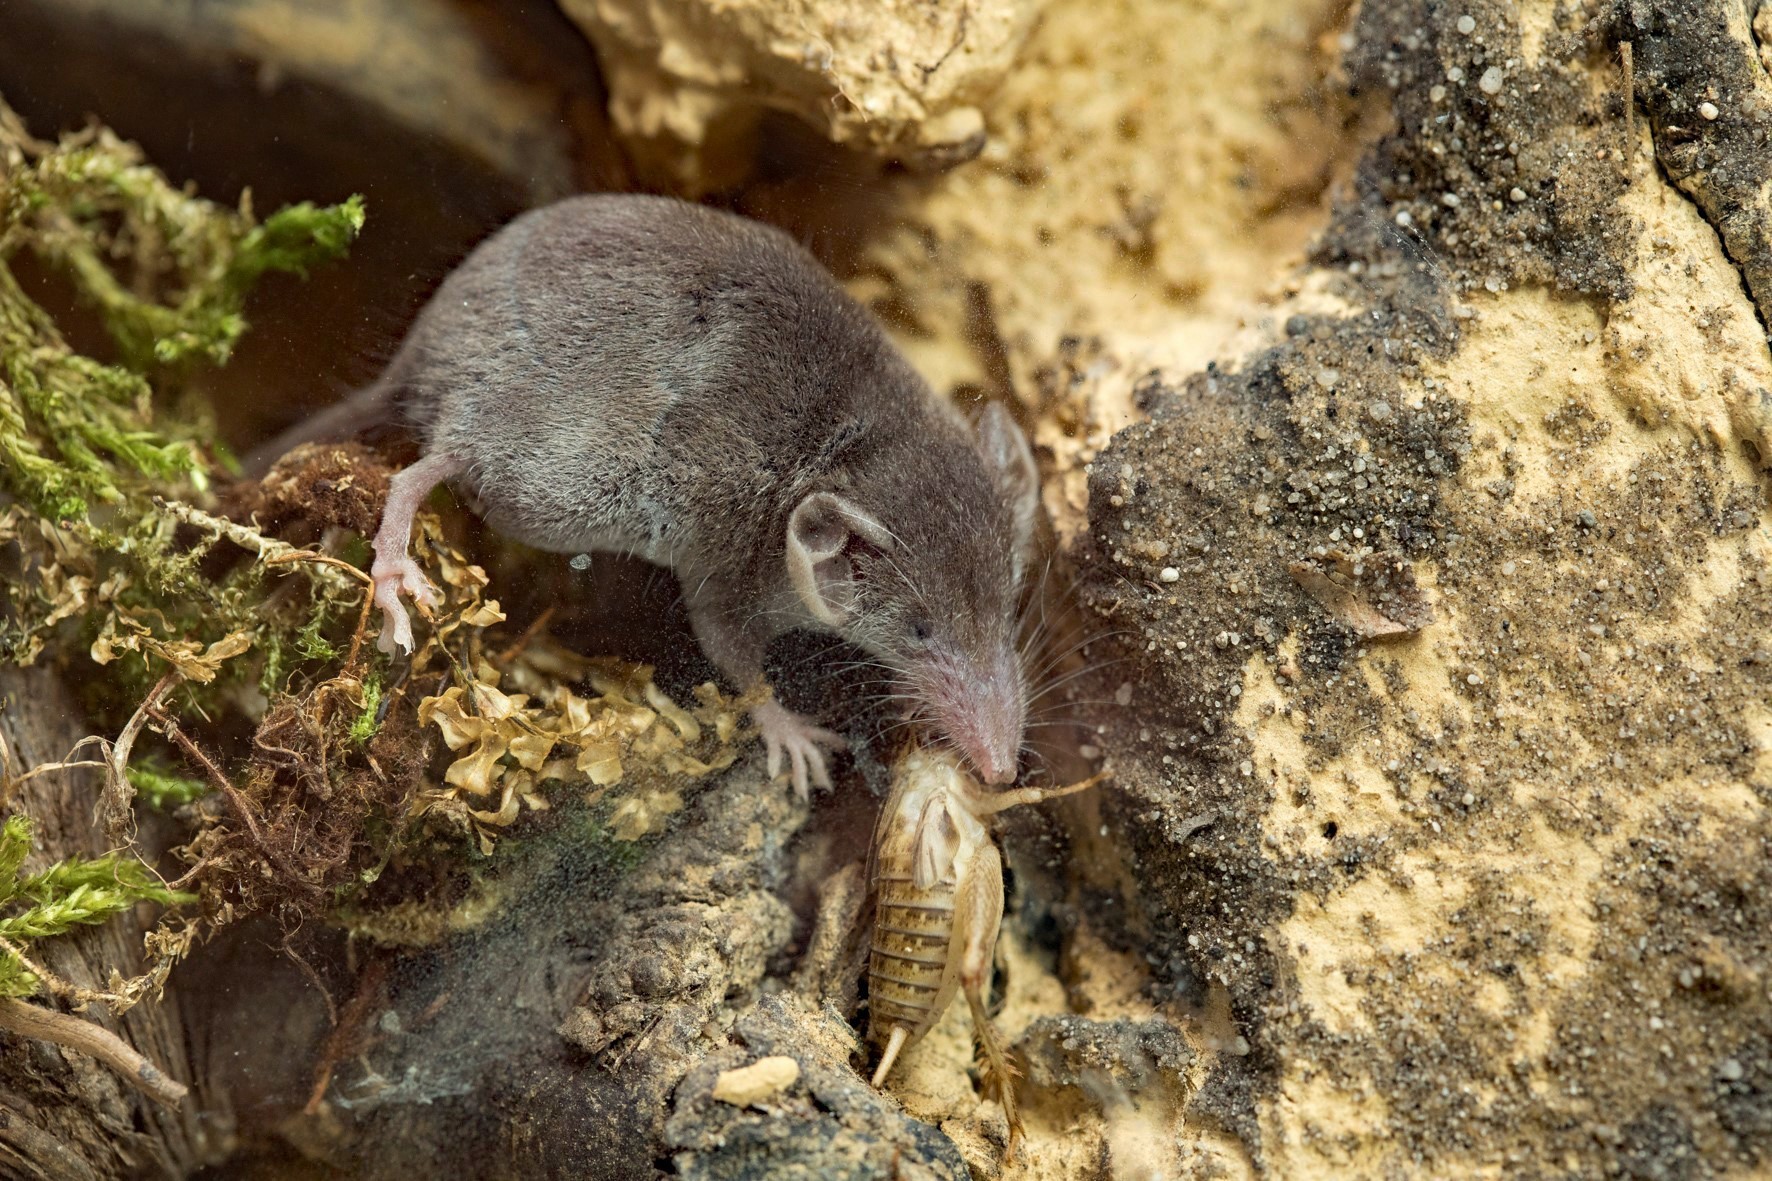 White-toothed pygmy shrew